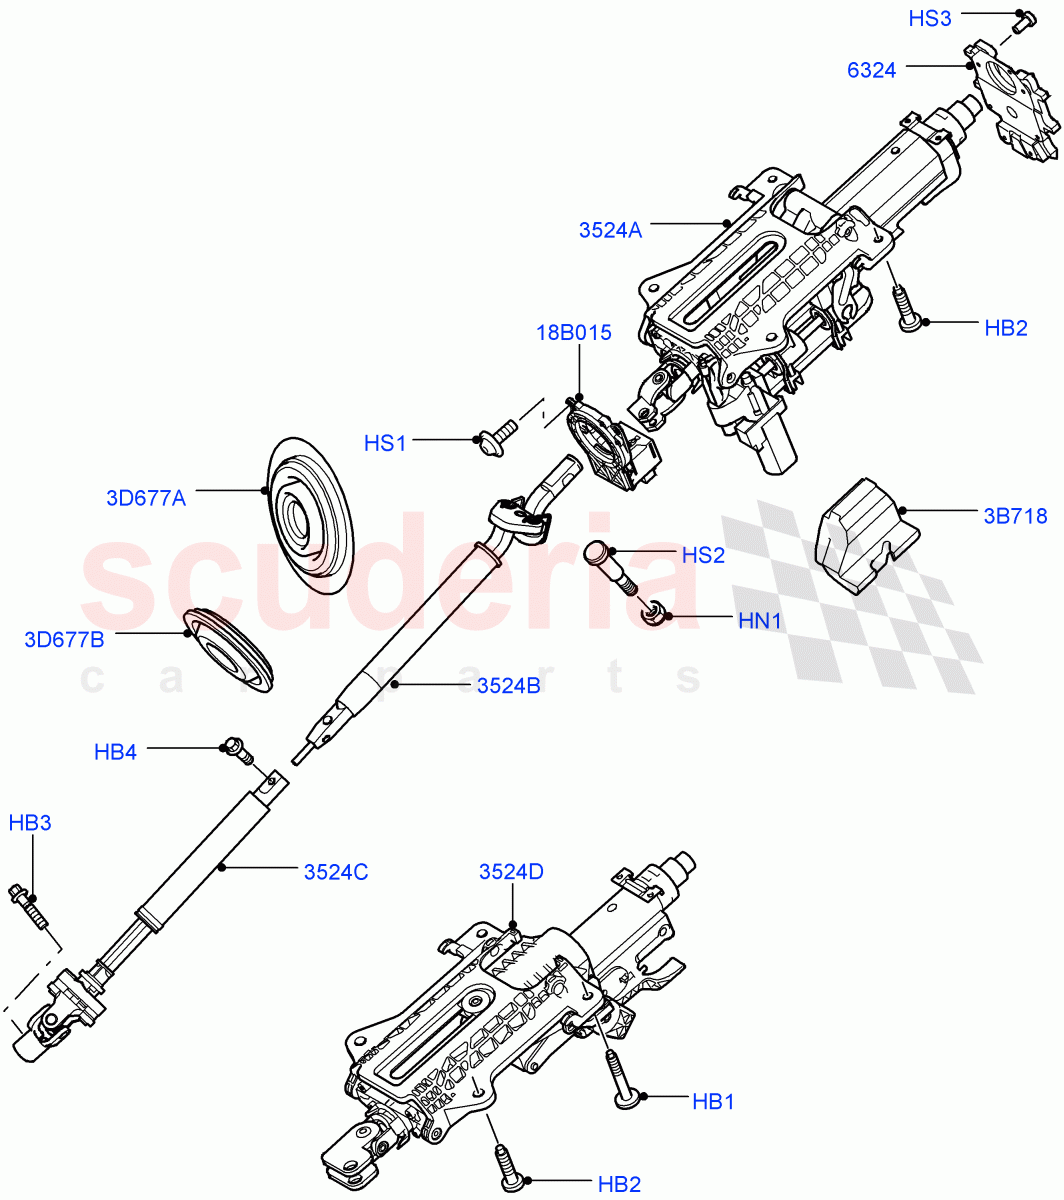 Steering Column((V)TO9A999999) of Land Rover Land Rover Range Rover Sport (2005-2009) [4.2 Petrol V8 Supercharged]